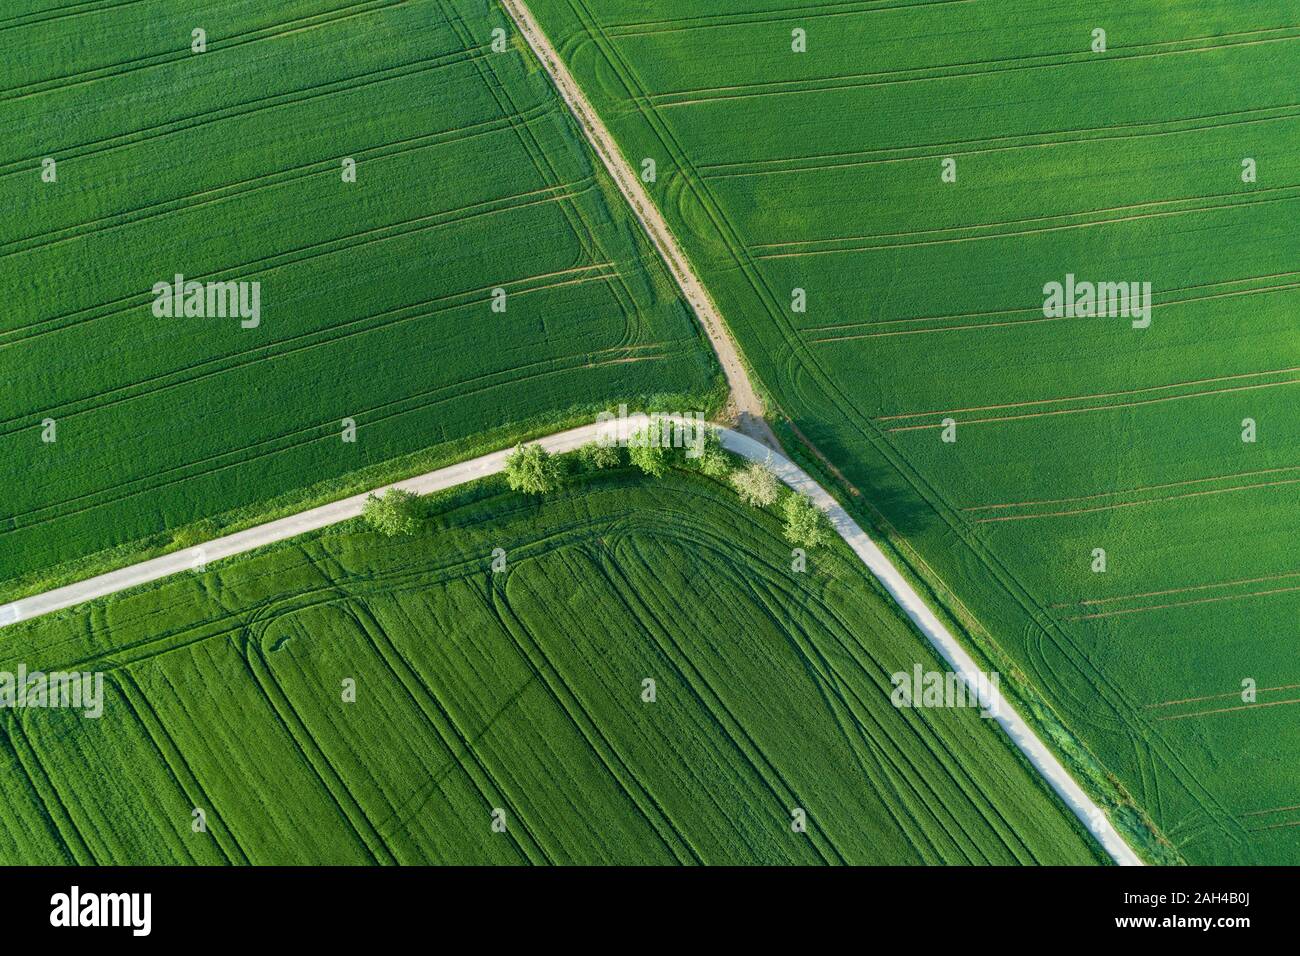 Germany, Bavaria, Aerial view of country roads cutting through green countryside fields in spring Stock Photo